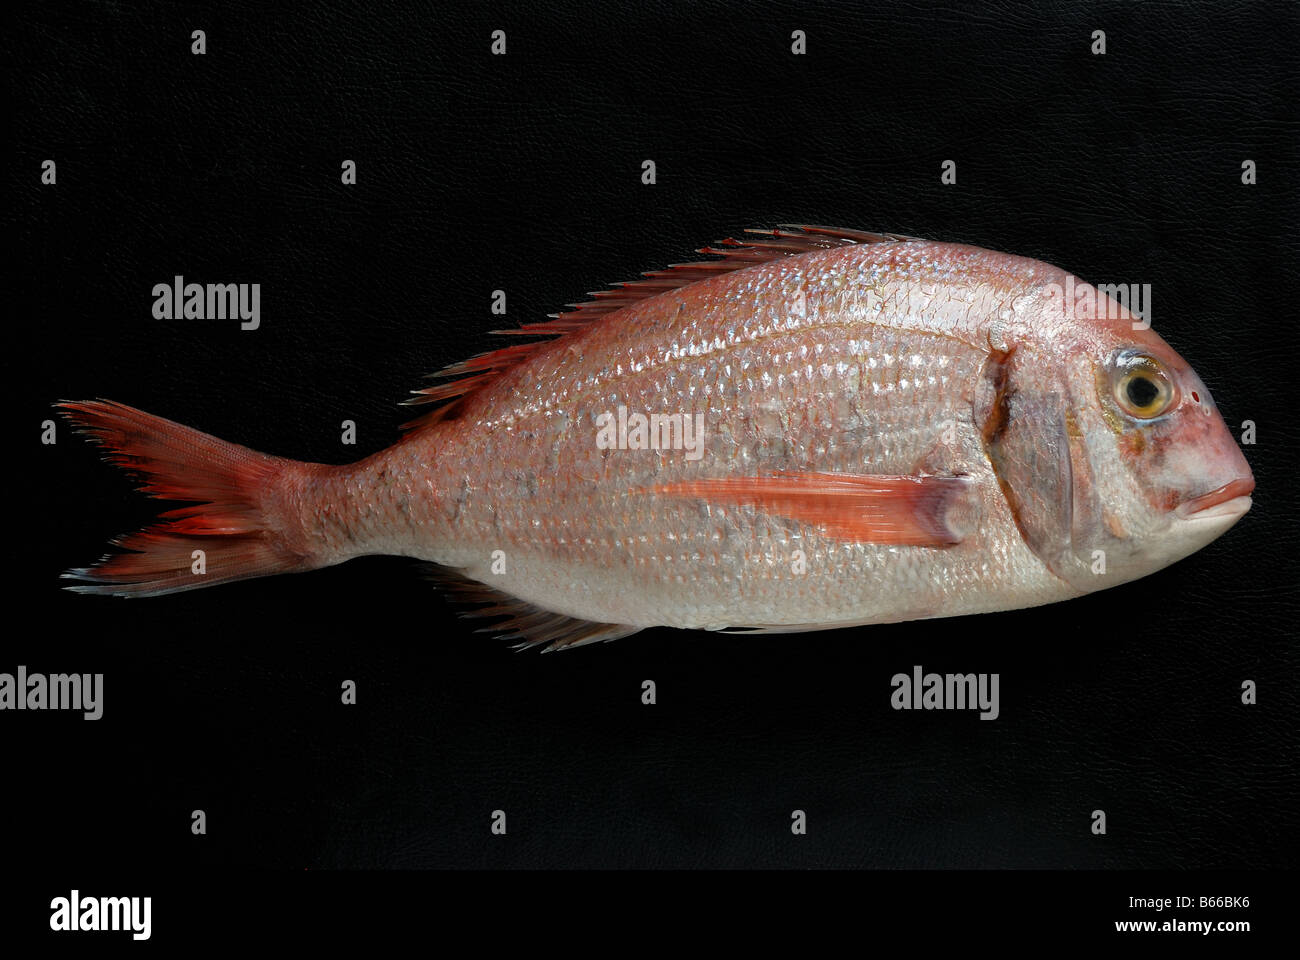 A red porgy (Pagrus pagrus) also known as red or common seabream, a species of fish in the Sparidae family. Stock Photo